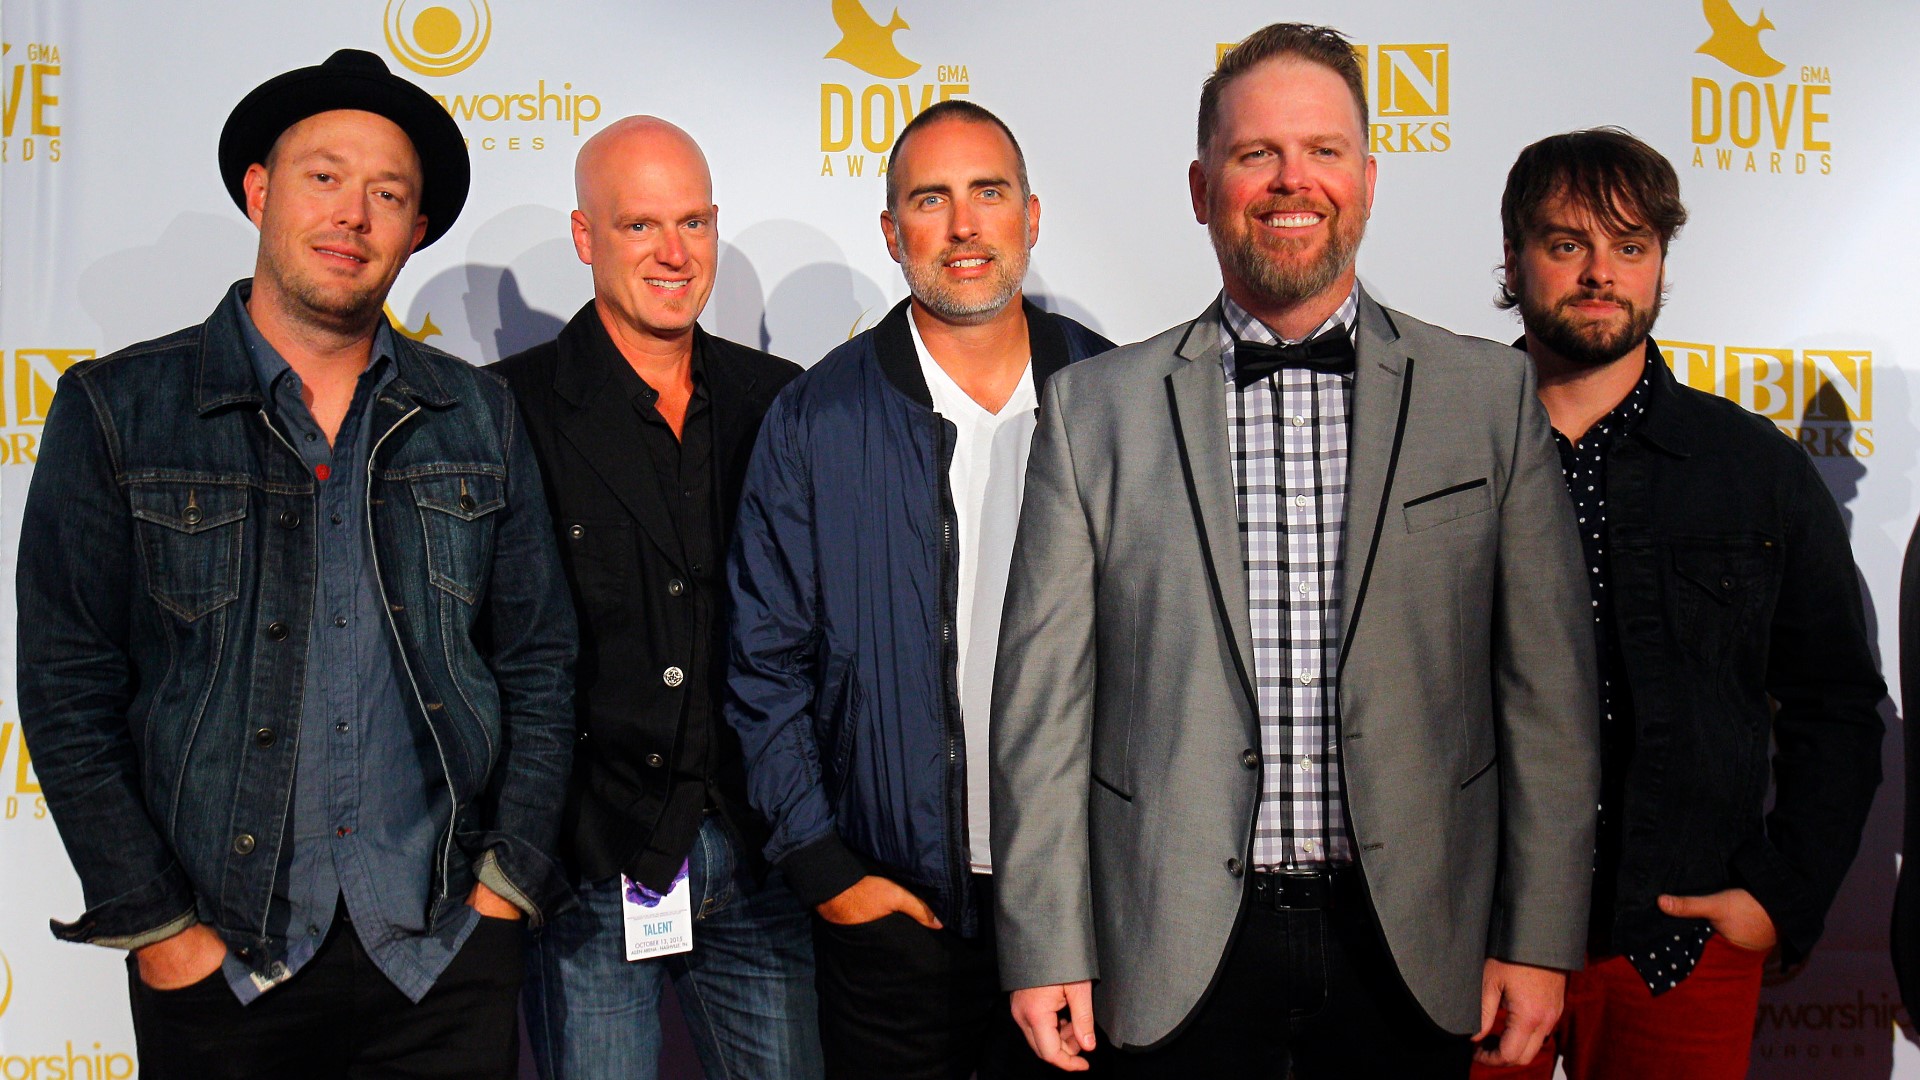 Mercyme Wallpapers